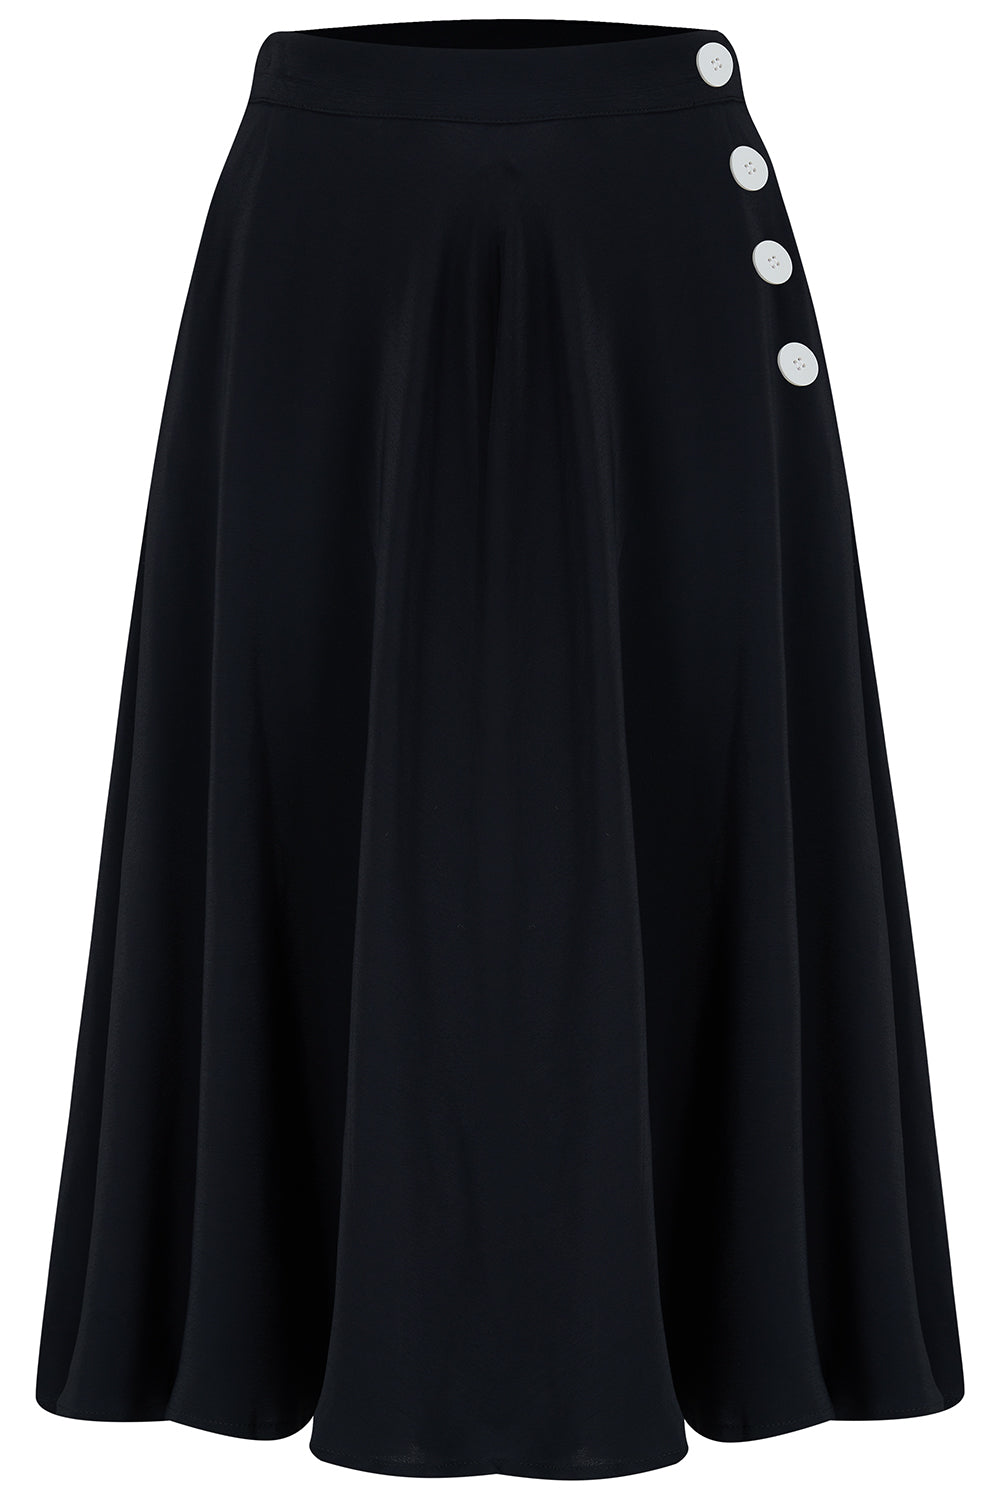 "Isabelle" Skirt in Black, Classic & Authentic 1940s Vintage Inspired Style